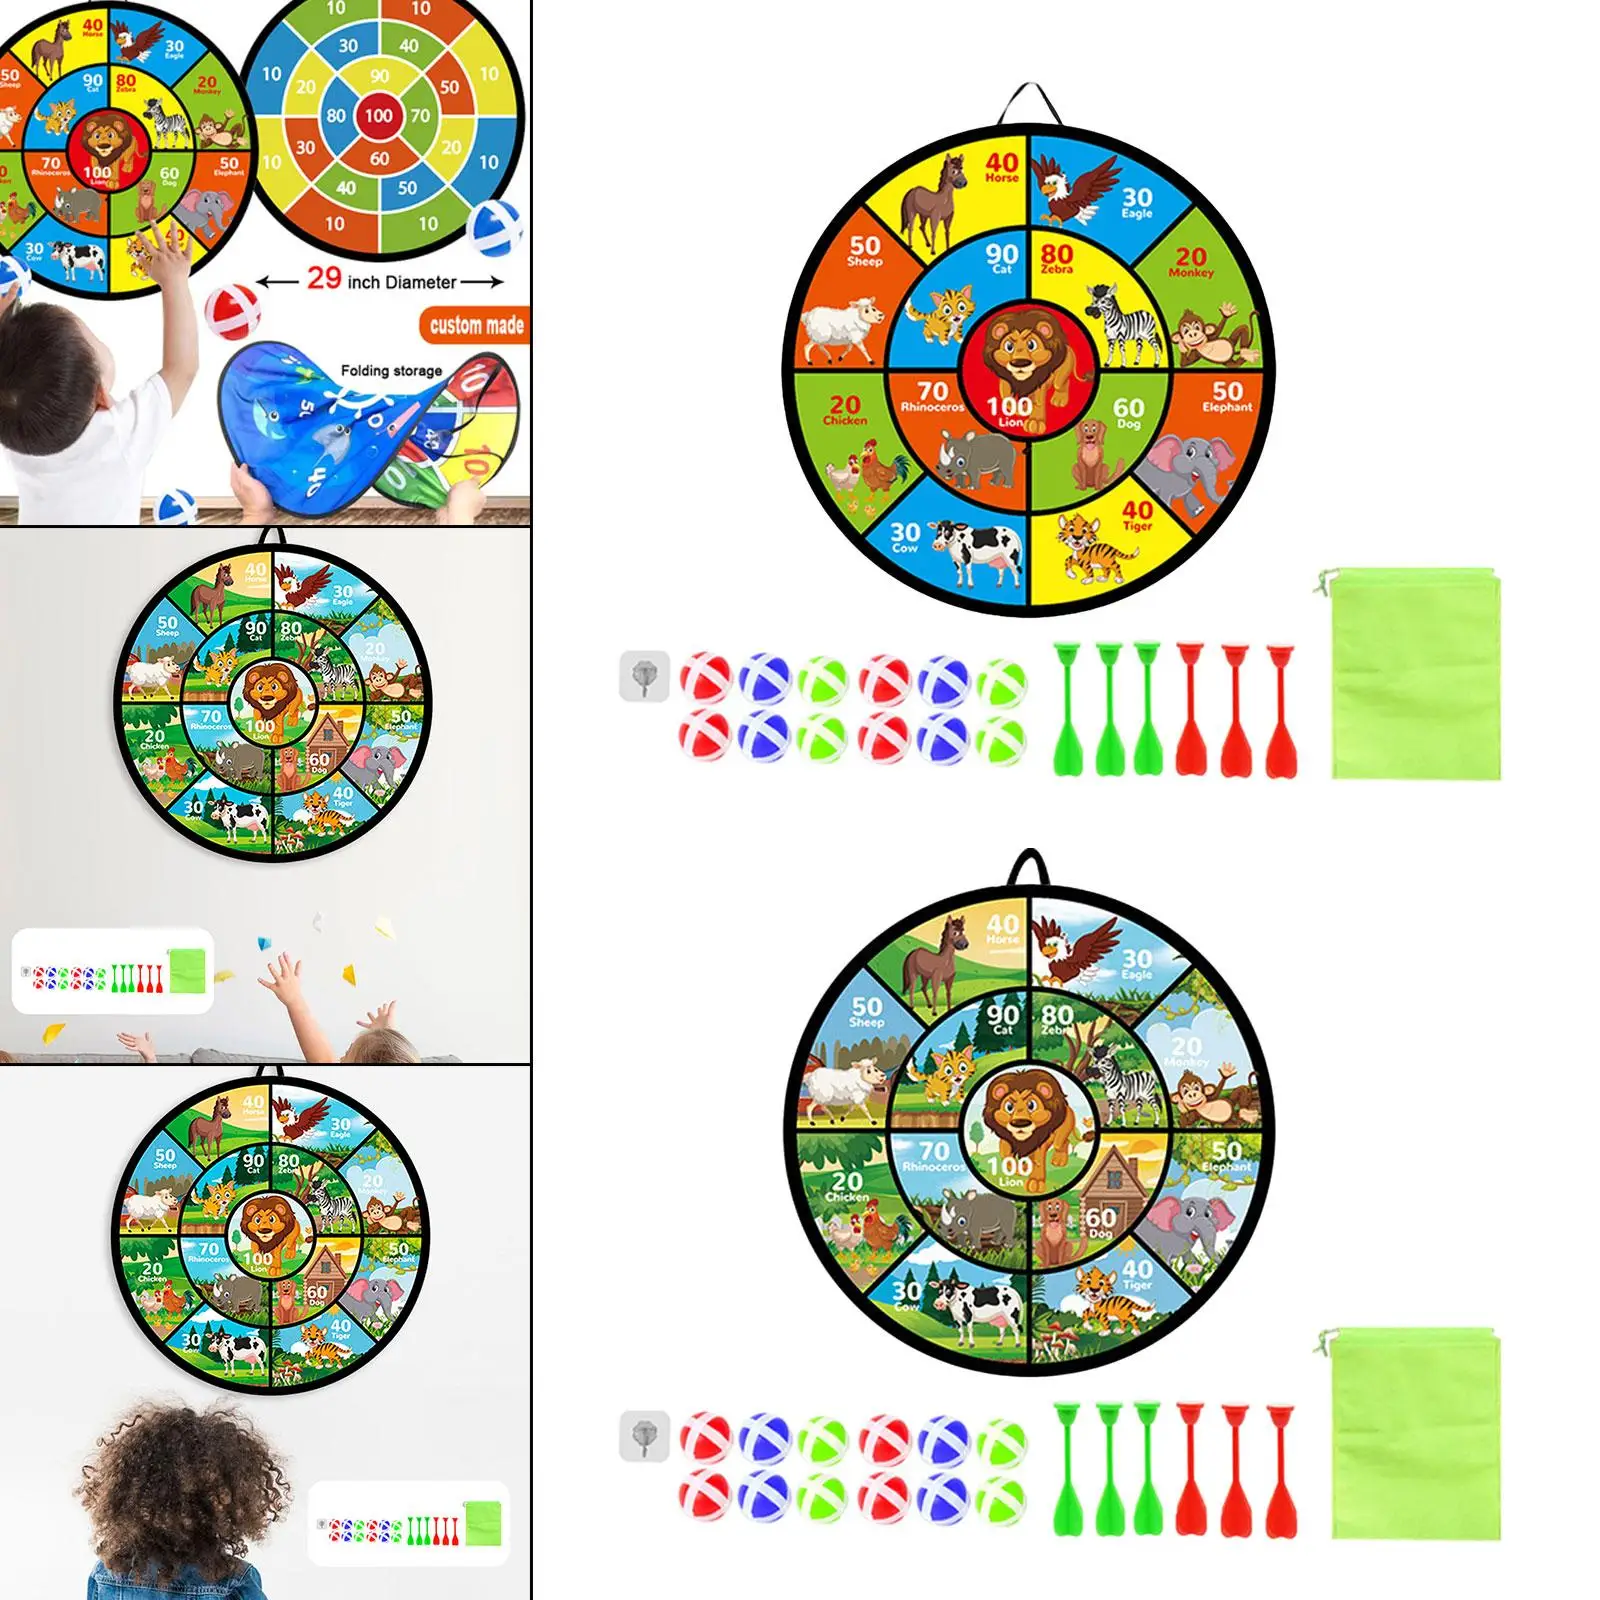 Double Sided Dart Board for Kids Durable Indoor/Outdoor Target Games with 12 Sticky Balls, 6 Darts Gift for Boys Girls